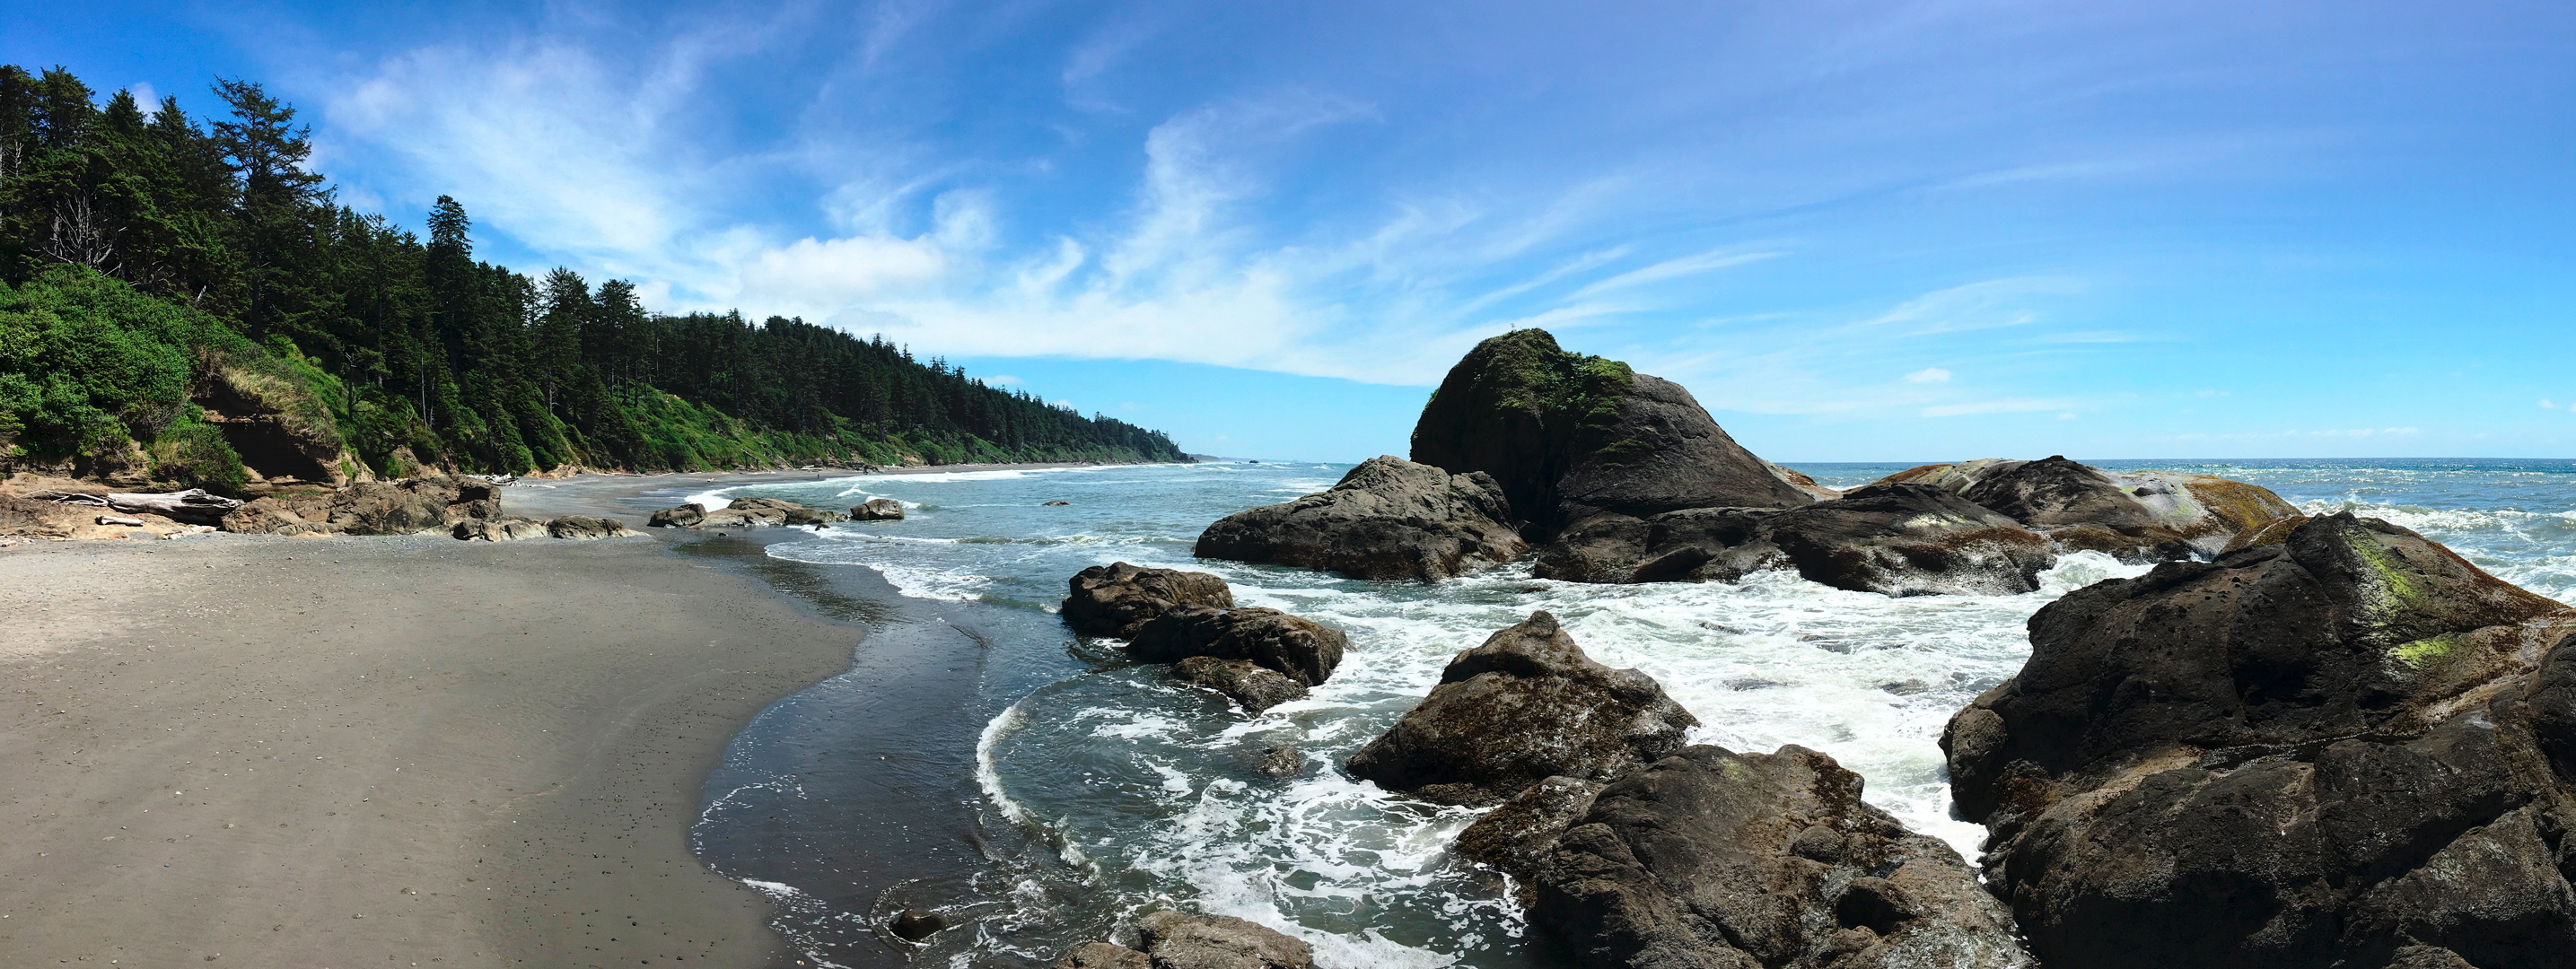 The Washington coast with a sandy beach, bluffs covered in evergreen trees, and sea stacks in the water